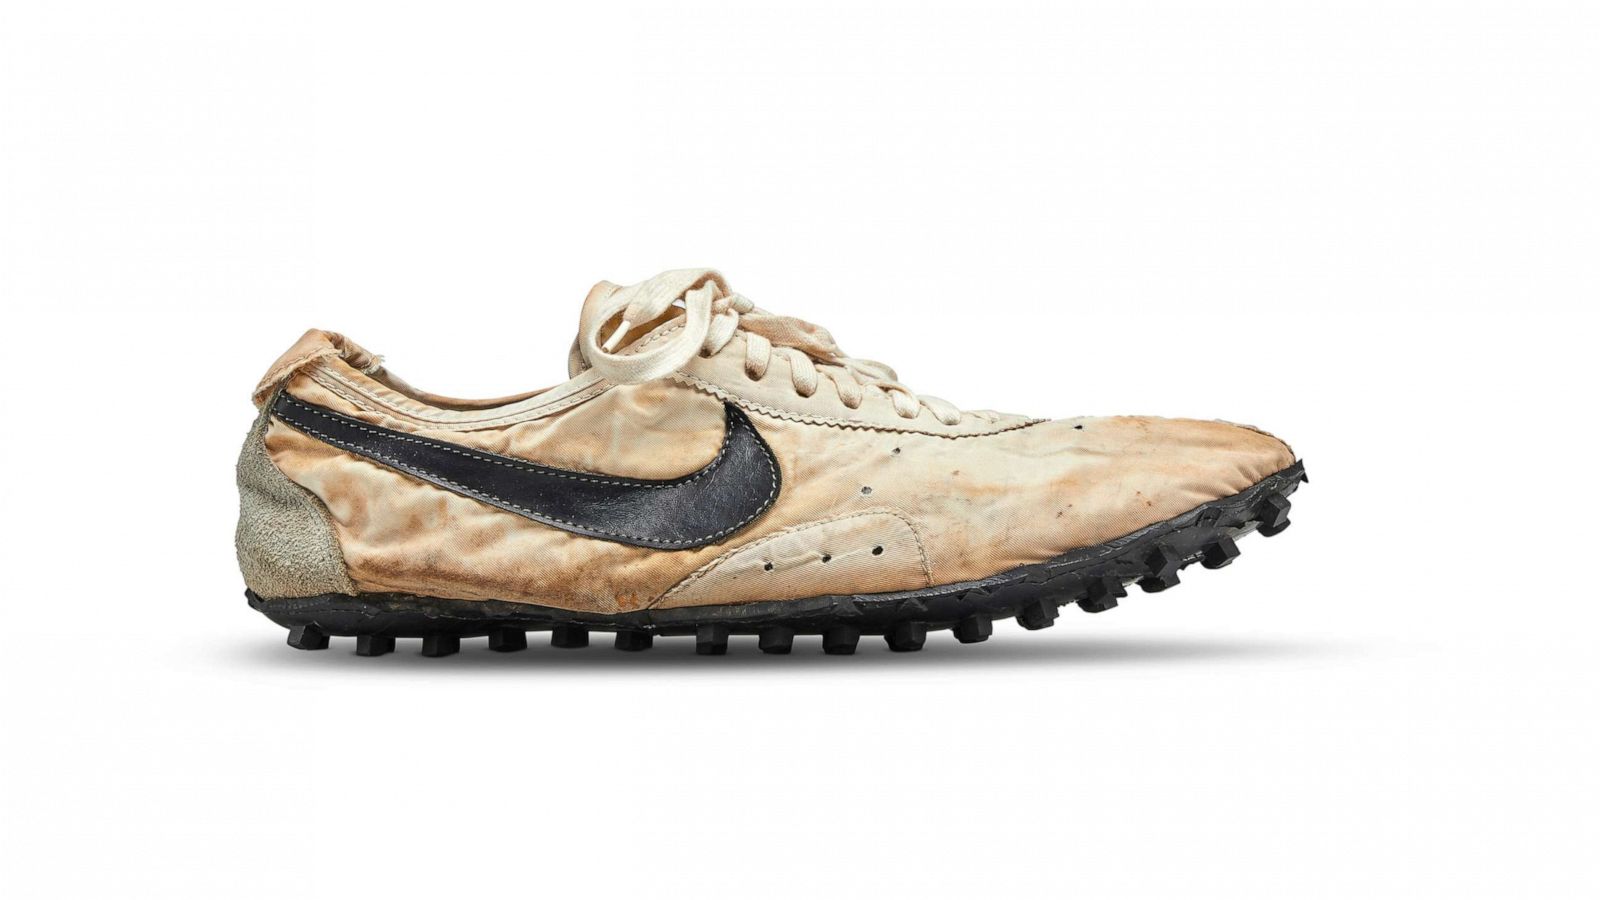 Rare Nike 'Moon Shoe' auctions for 